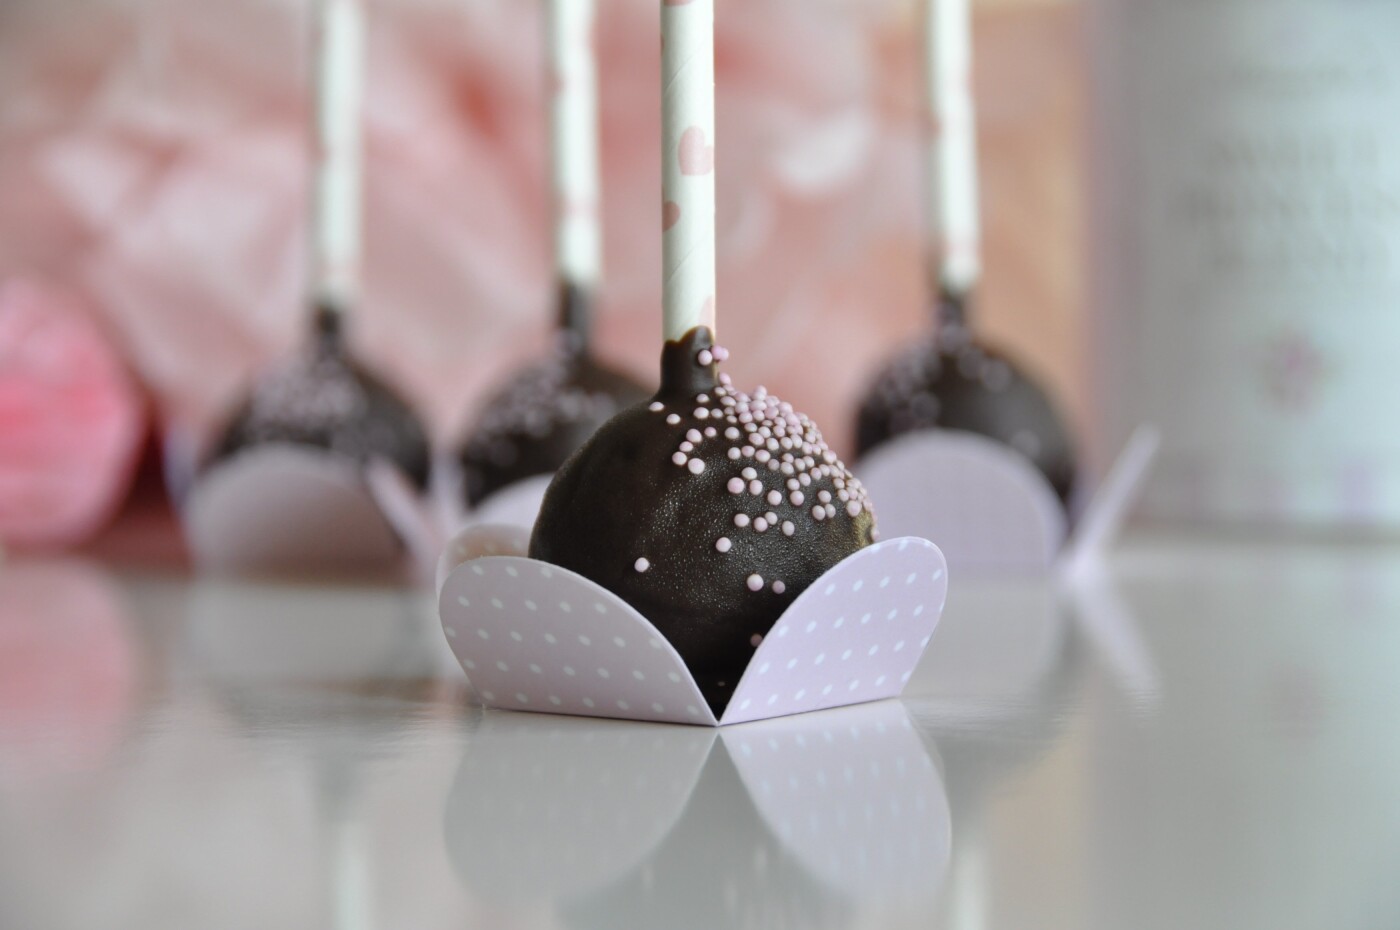 I have made these cakepops for the first birthday of a beautiful little girl. They were red velvet inside and milk chocolate on the outside: everyone loved them!